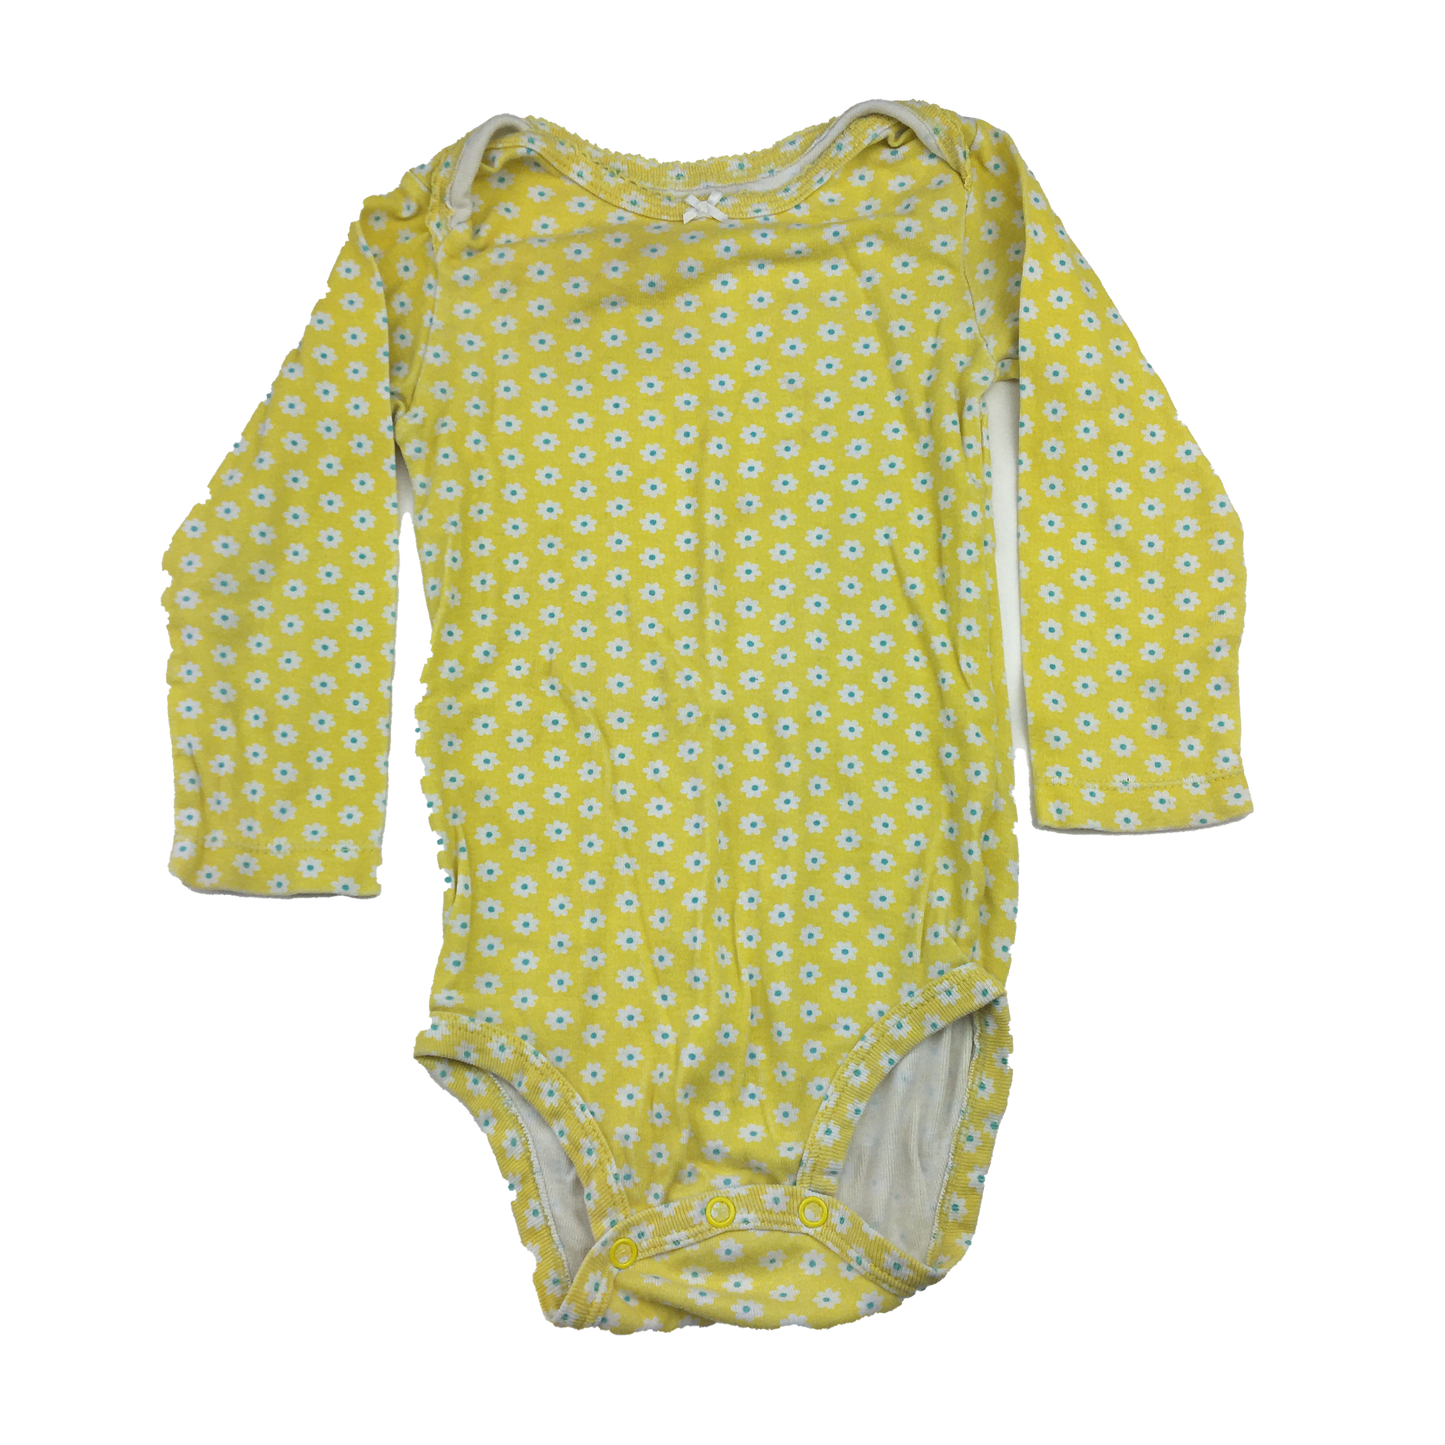 Carter's Yellow Long Sleeve Onesie with Daisy's 24M